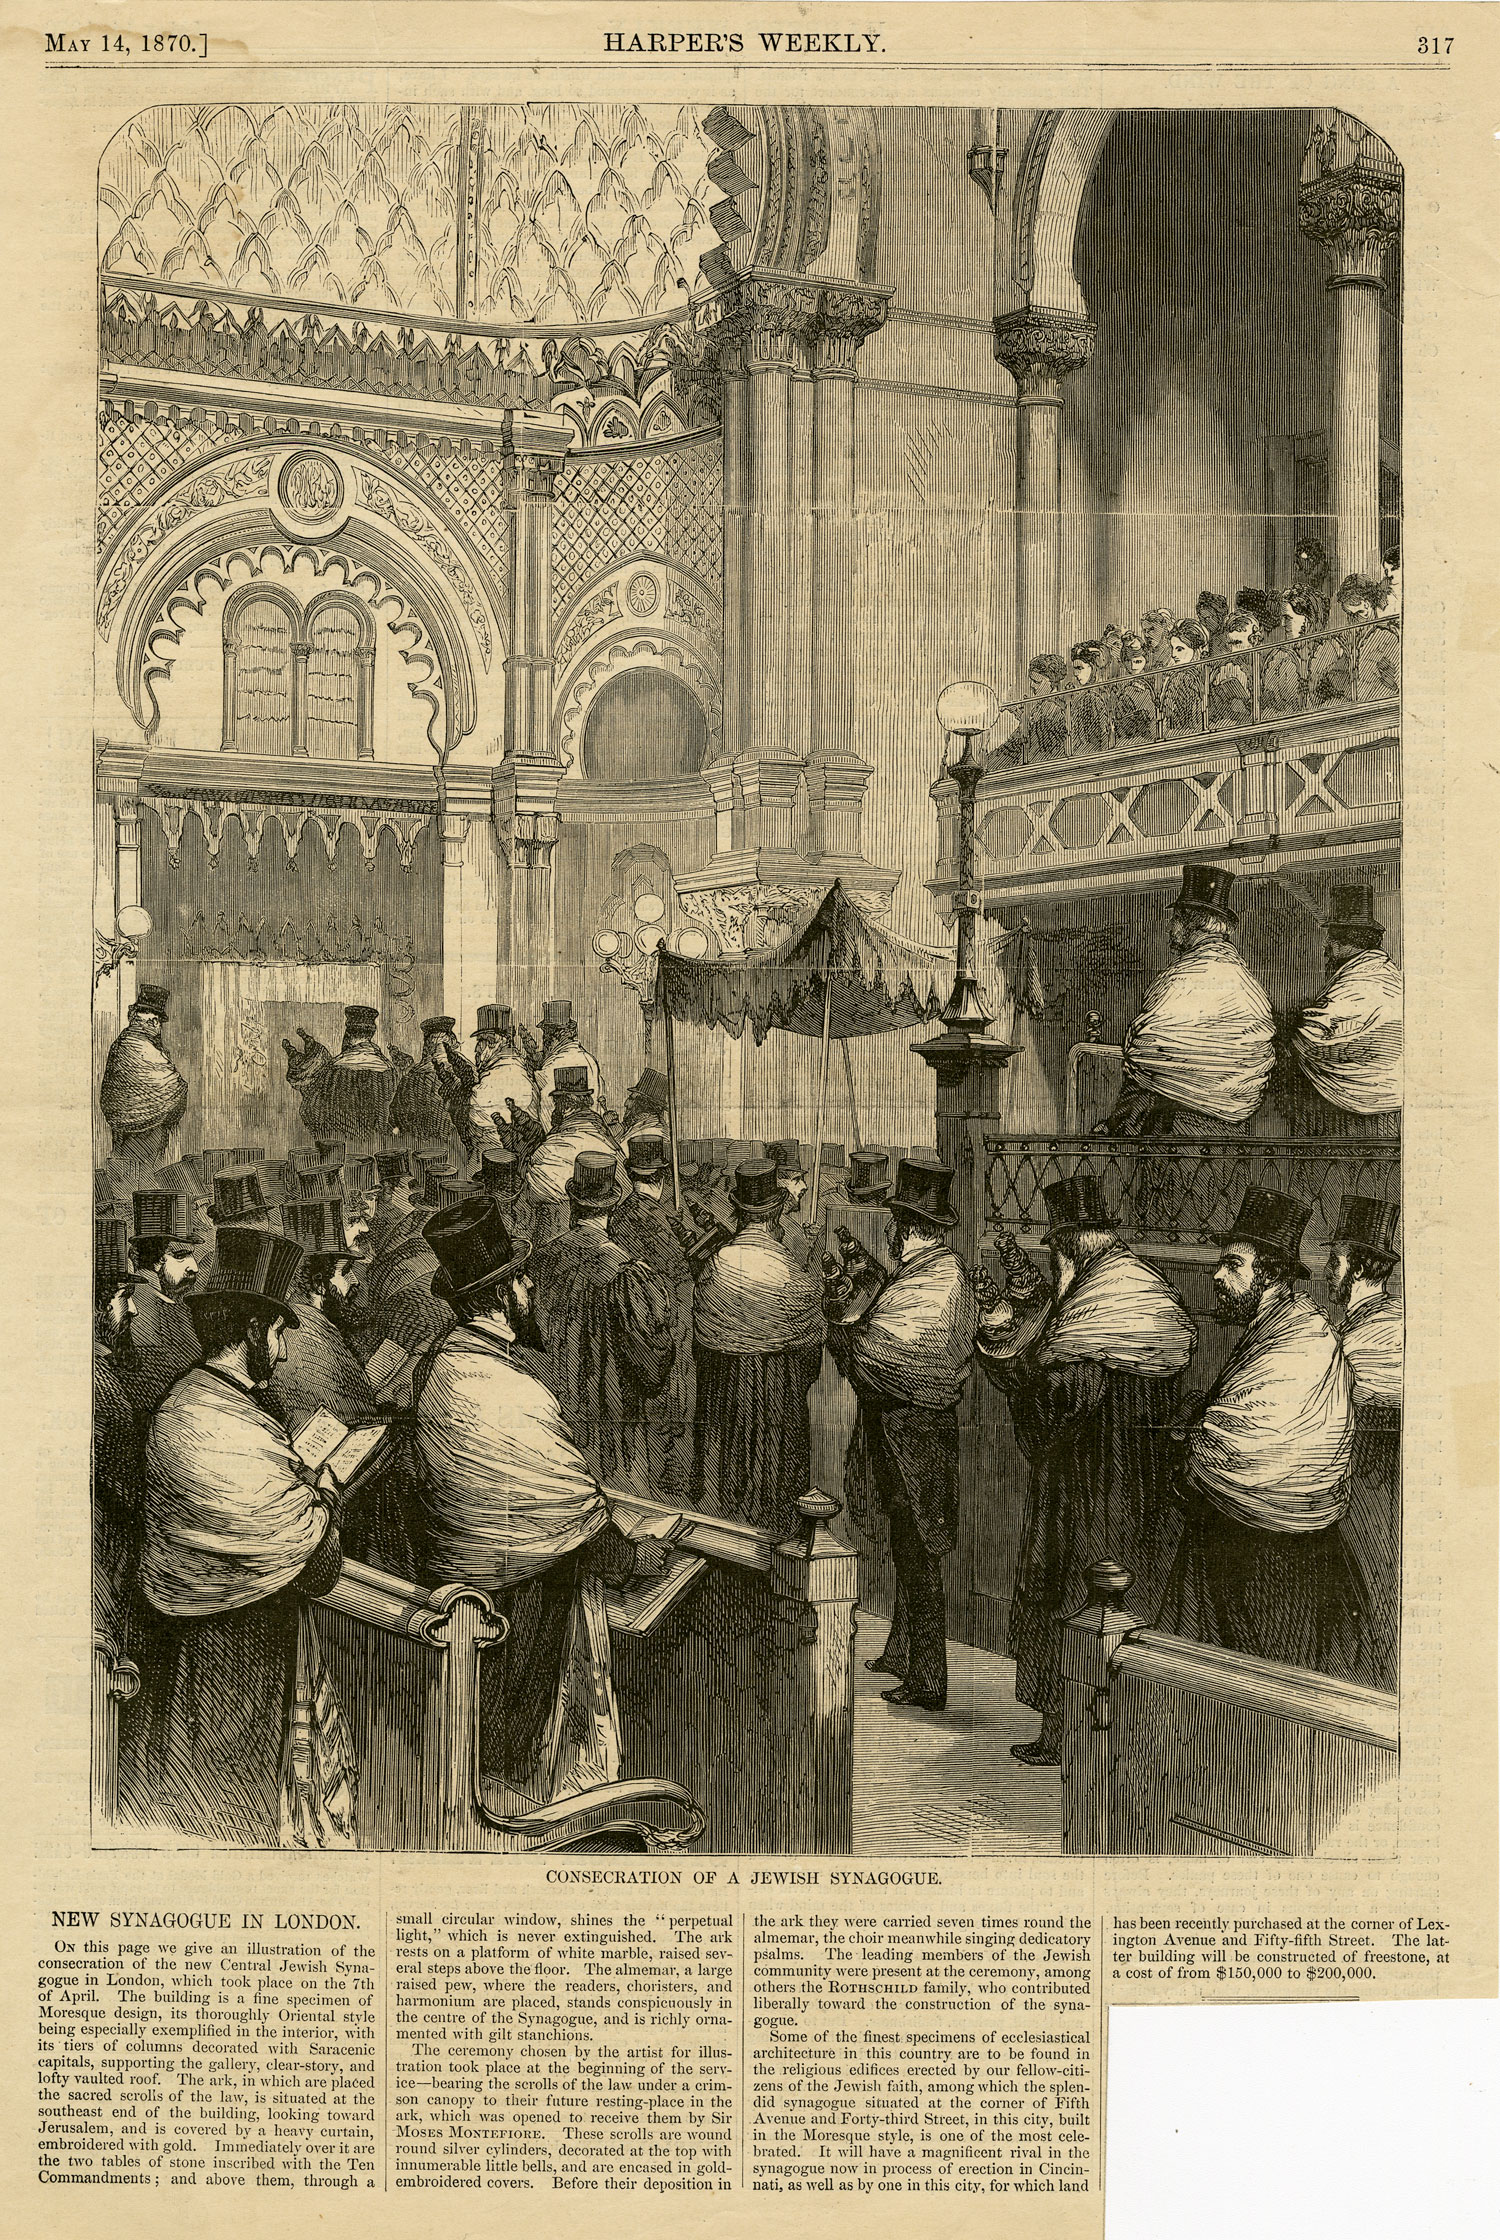 Illustration from Harper's Weekly shows the procession of the Torah in the consecration ceremony, and shows the architectural design by Nathan Joseph